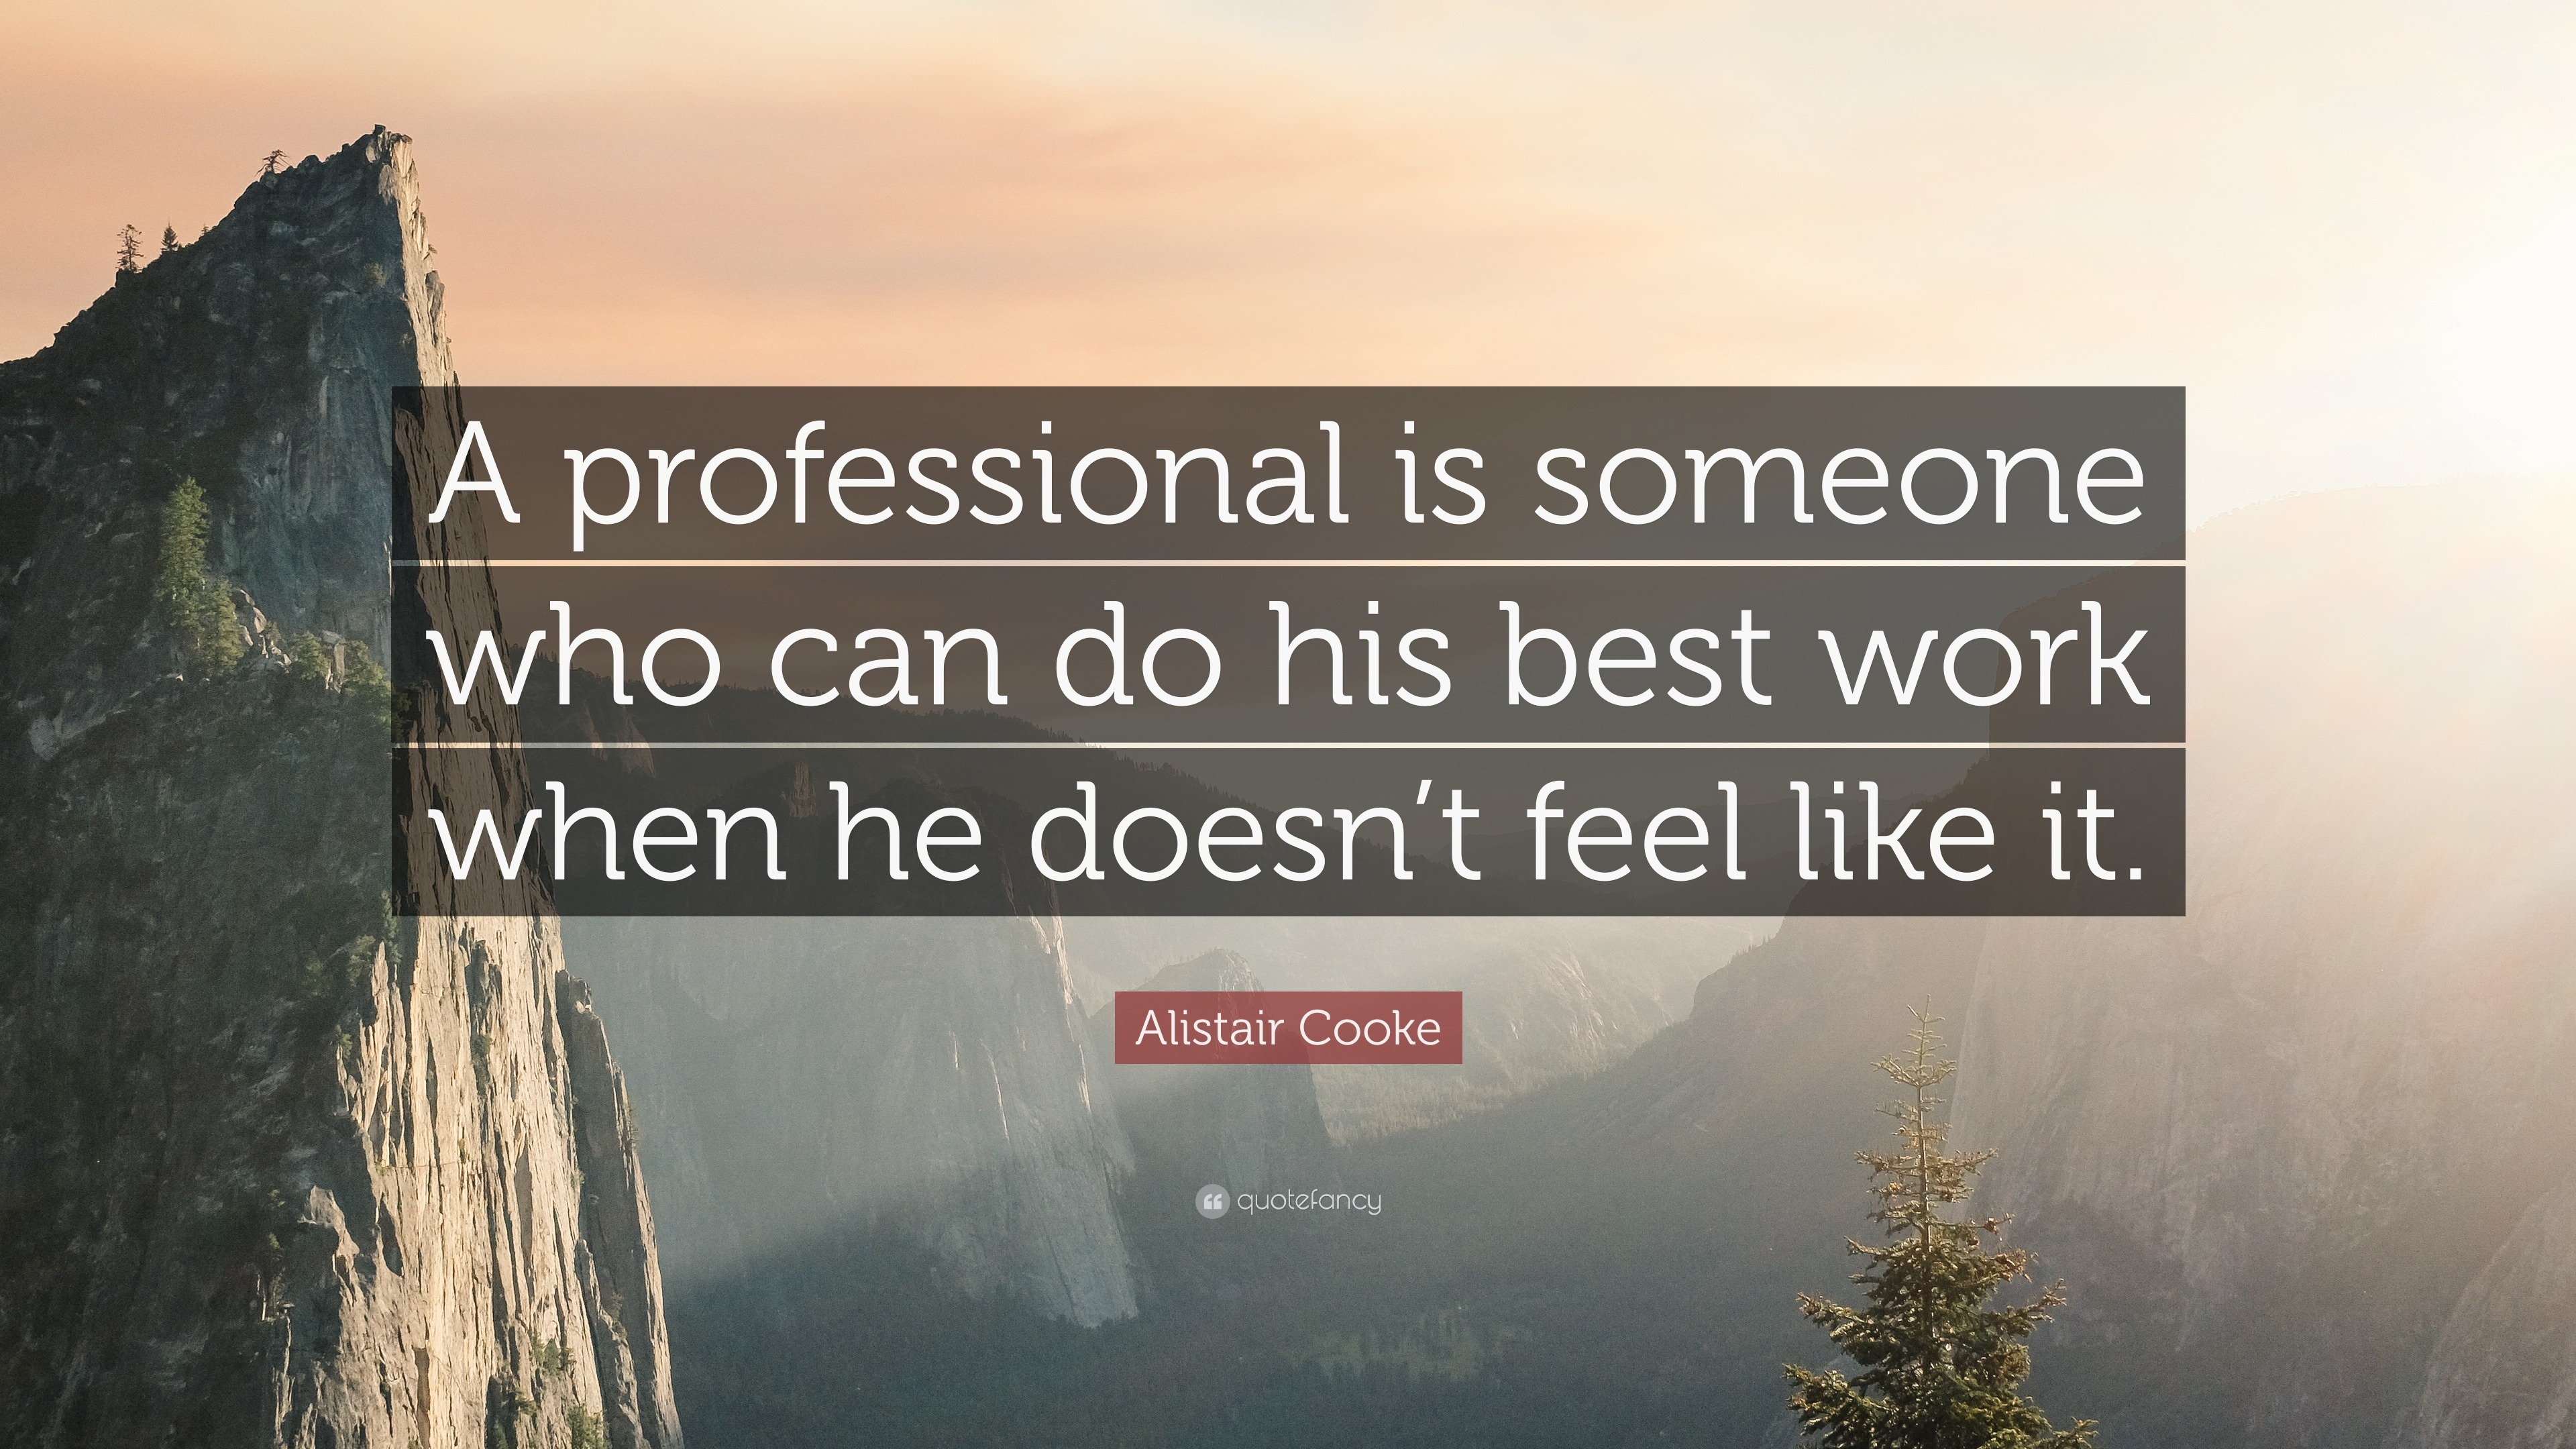 Alistair Cooke Quote “A professional is someone who can